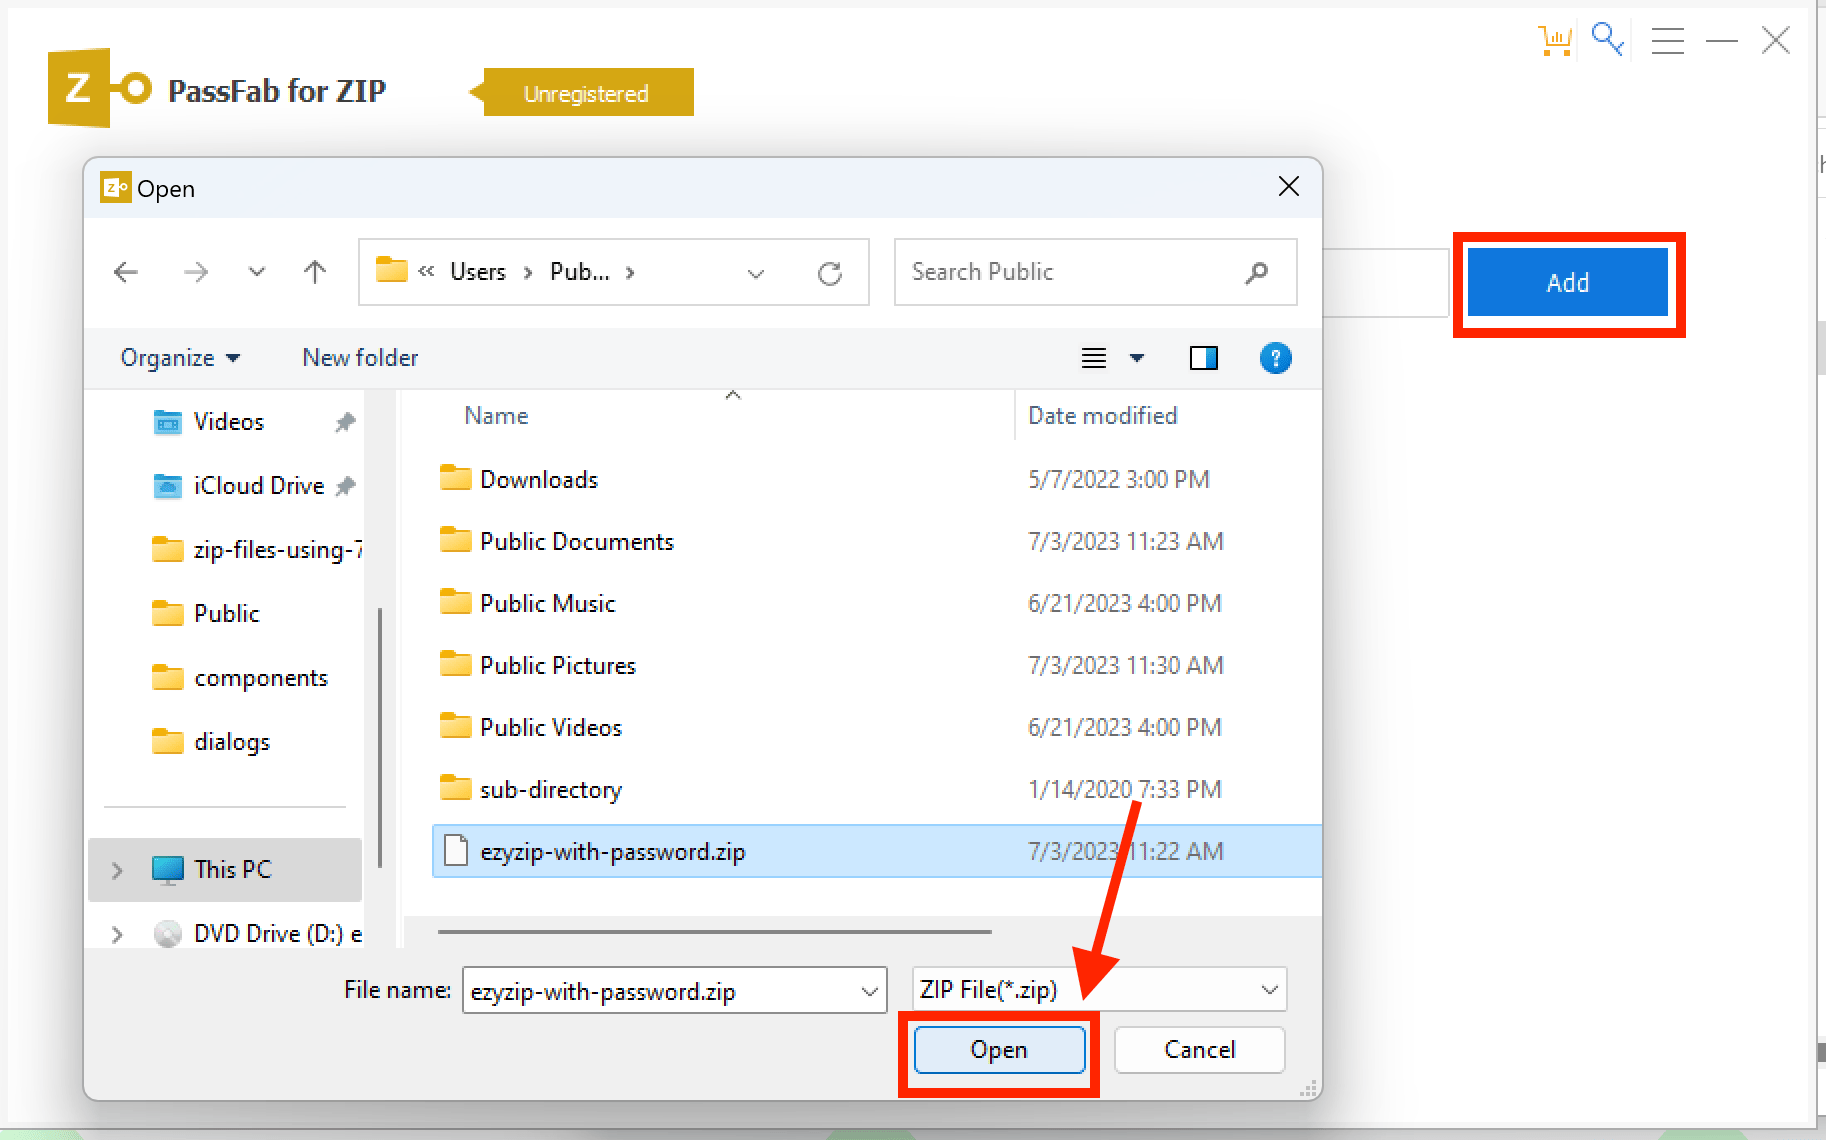 How To Use PassFab for ZIP: Step 4